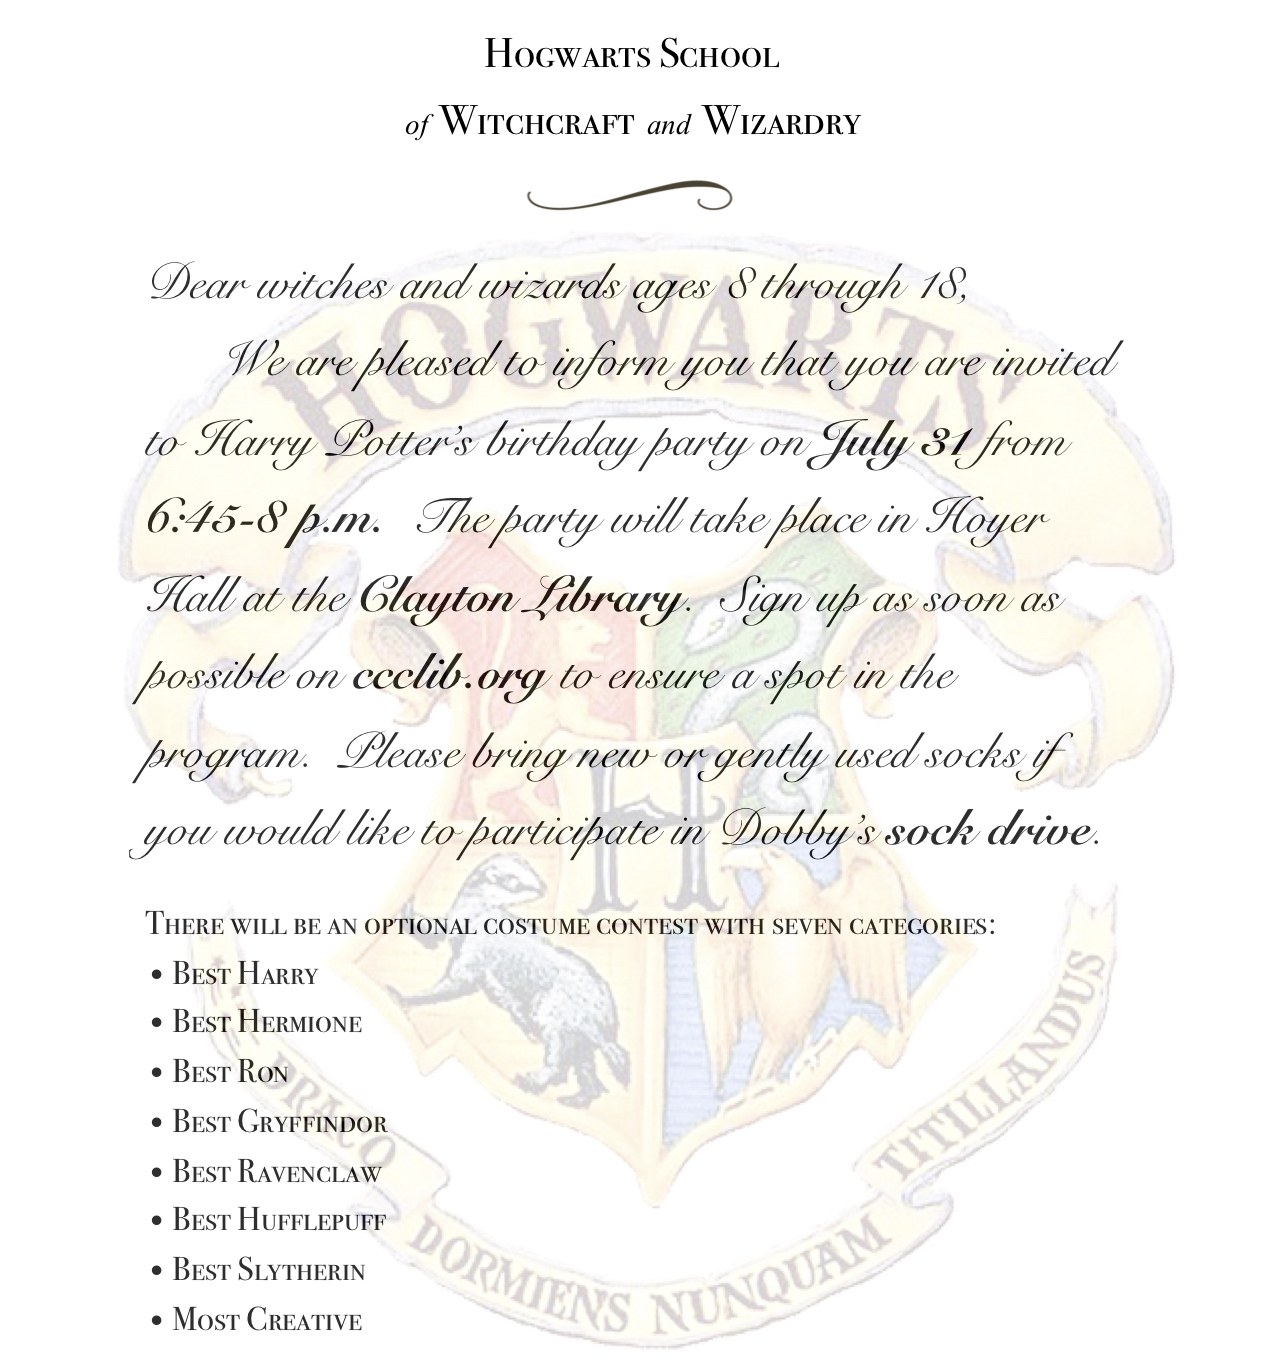 Harry Potter's Birthday Party flyer